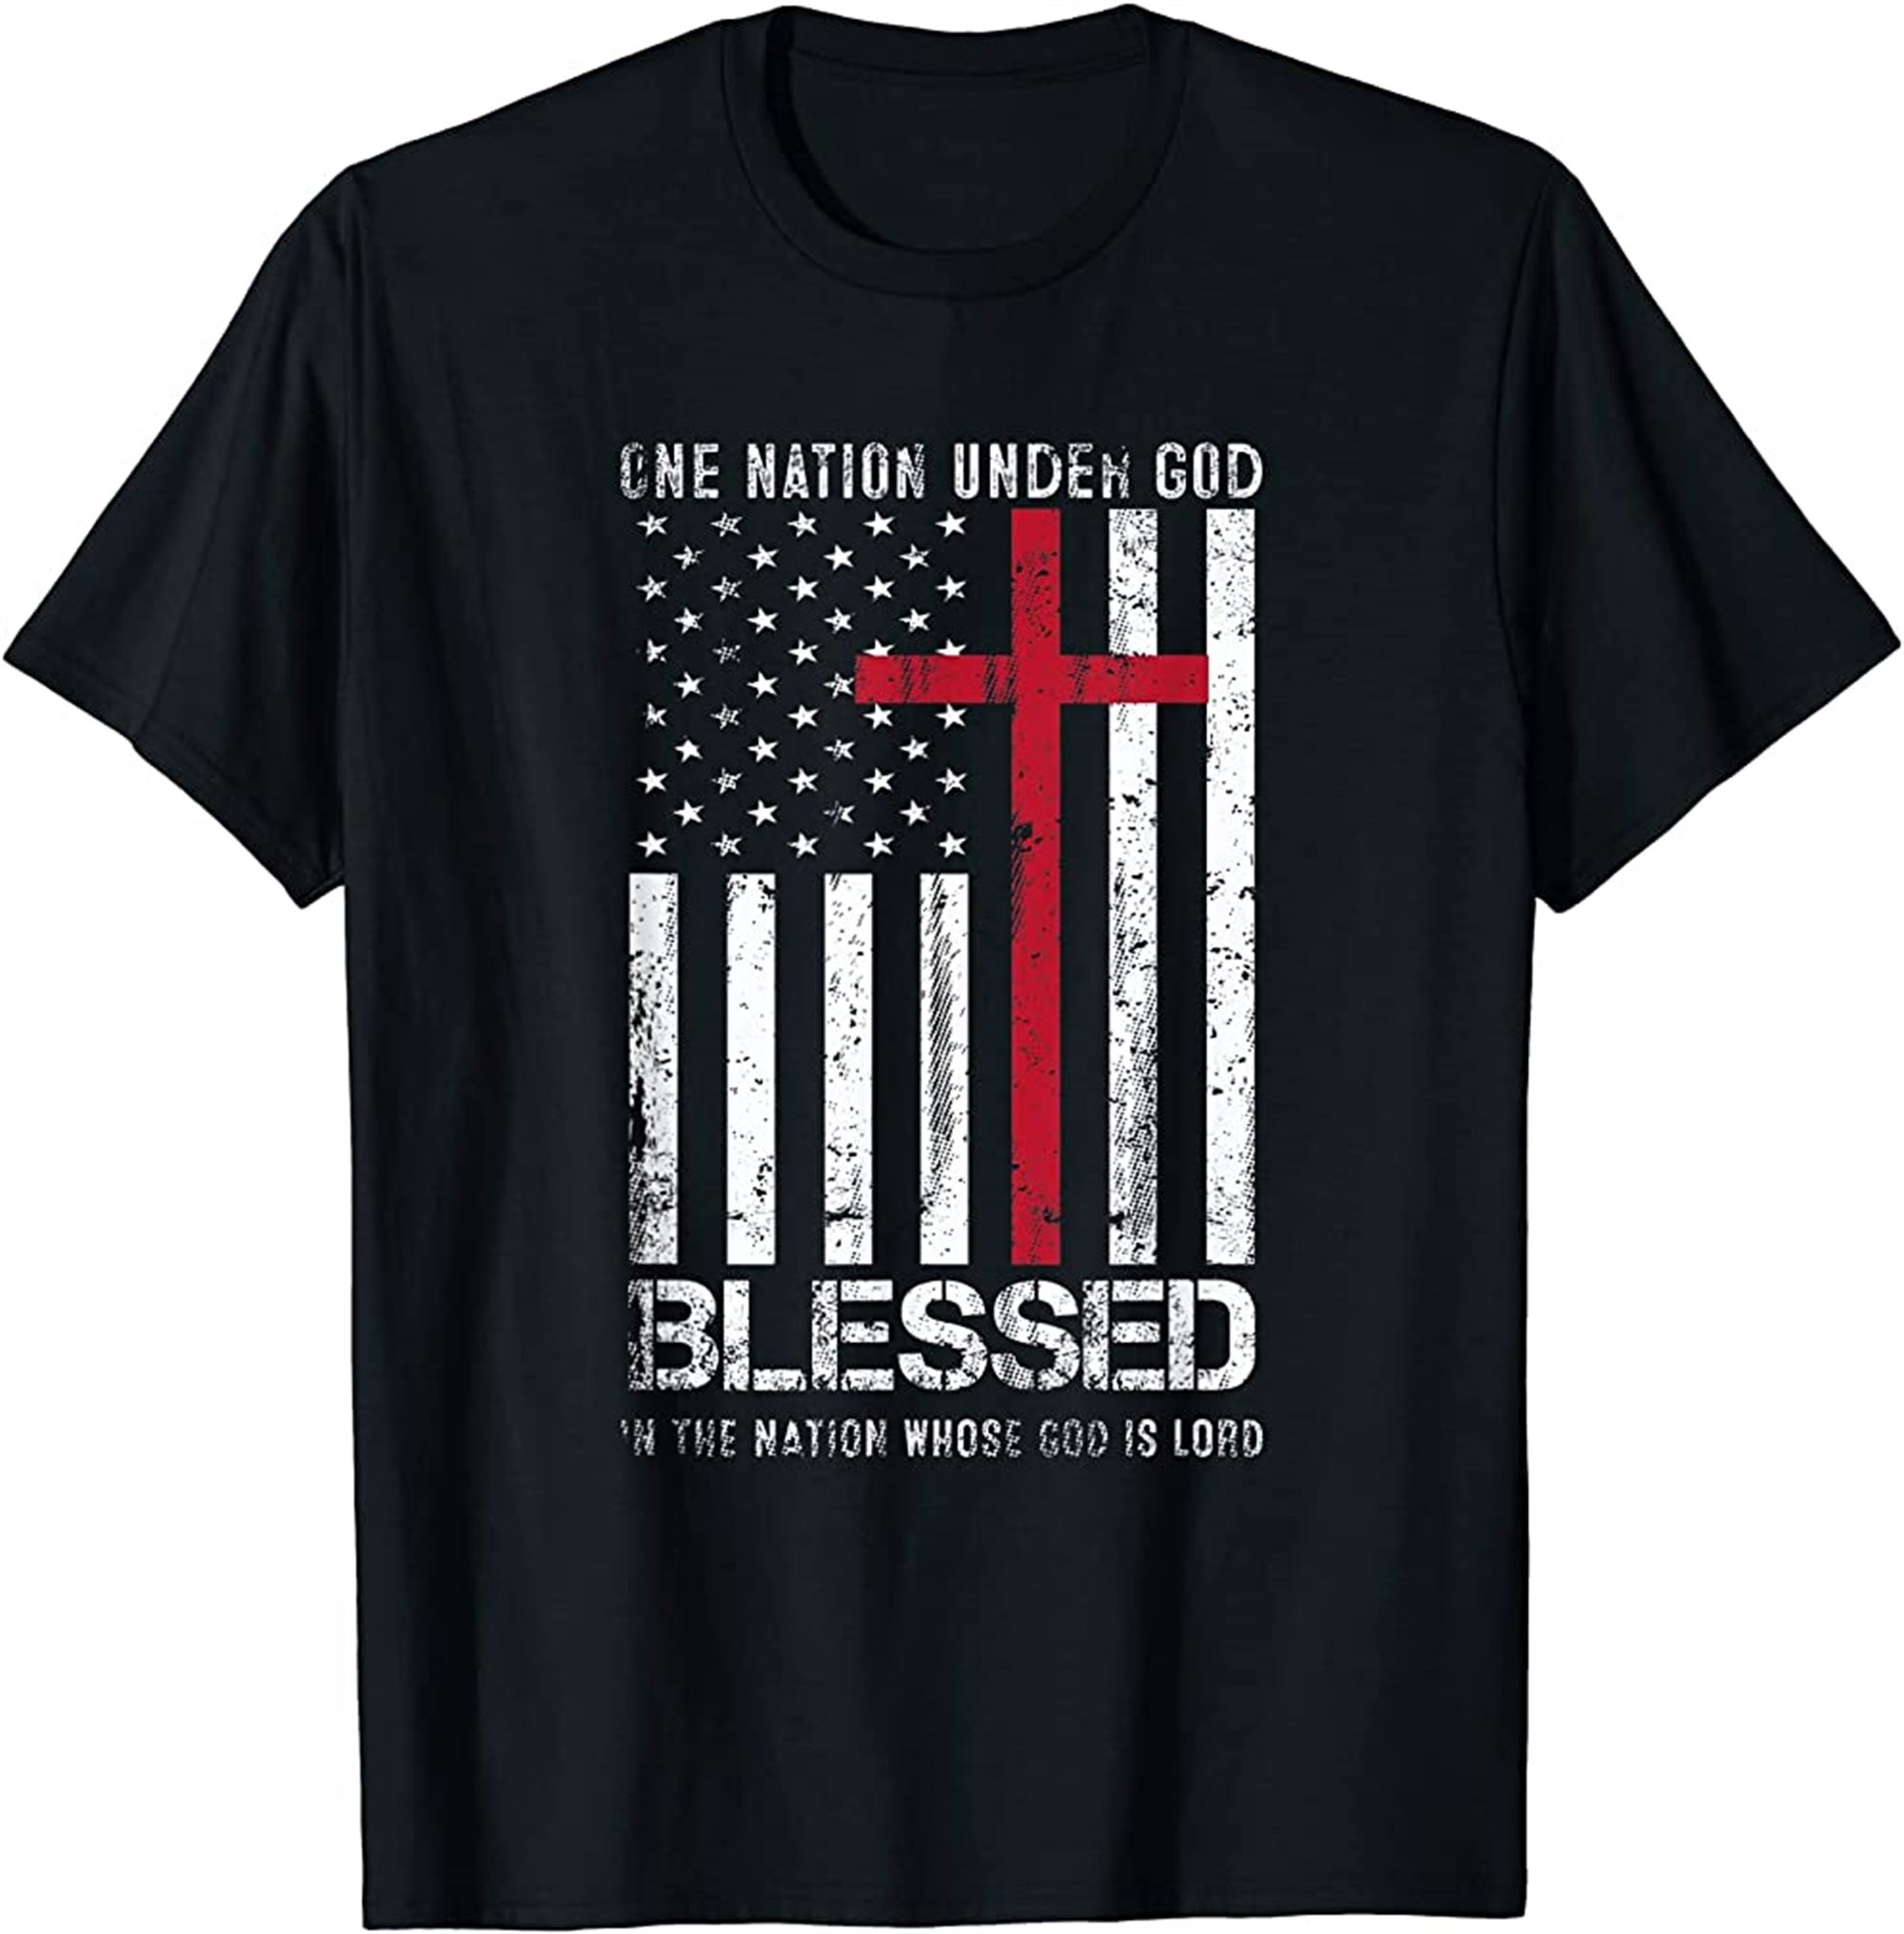 One Nation Under God American Flag Patriotic Christian T-shirt Size Up To 5xl